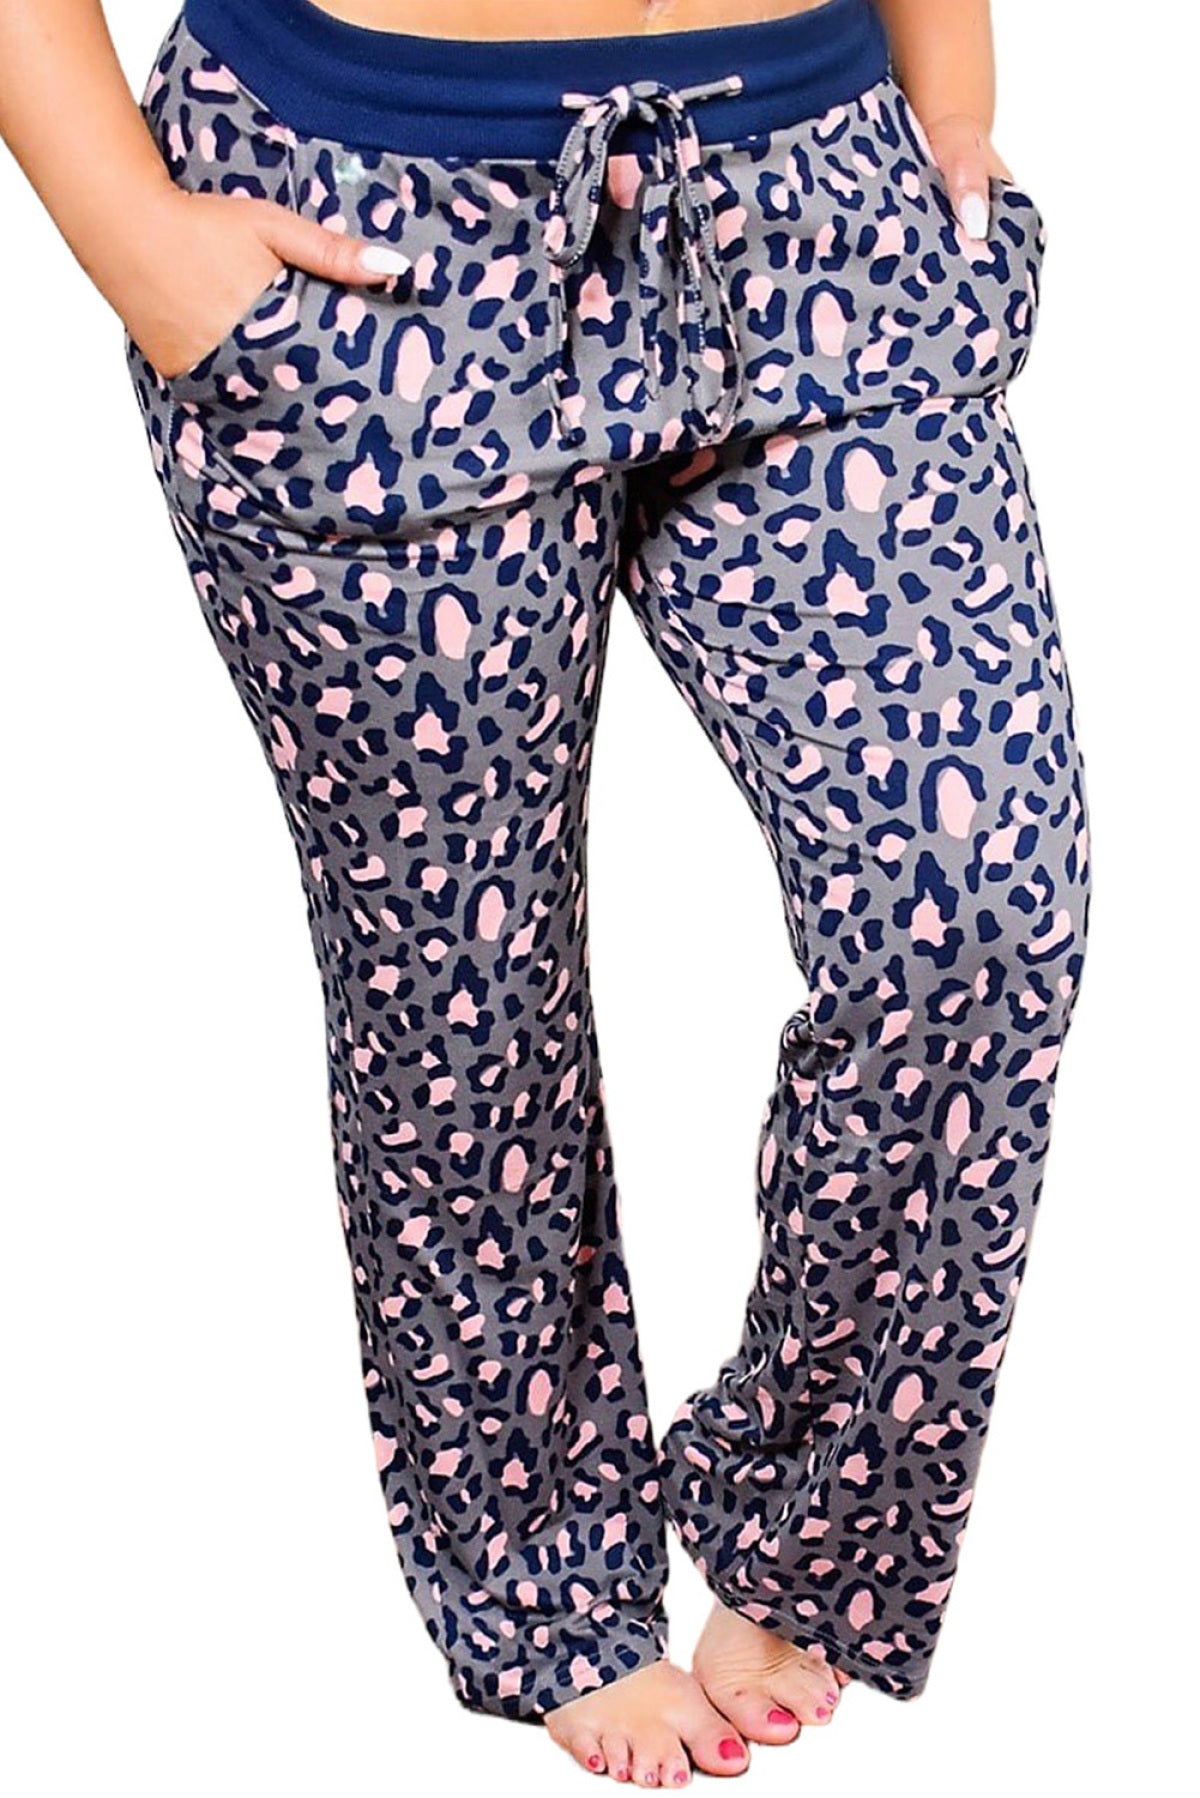 Leopard Print Solid Waistband Plus Size Pants | Art in Aging